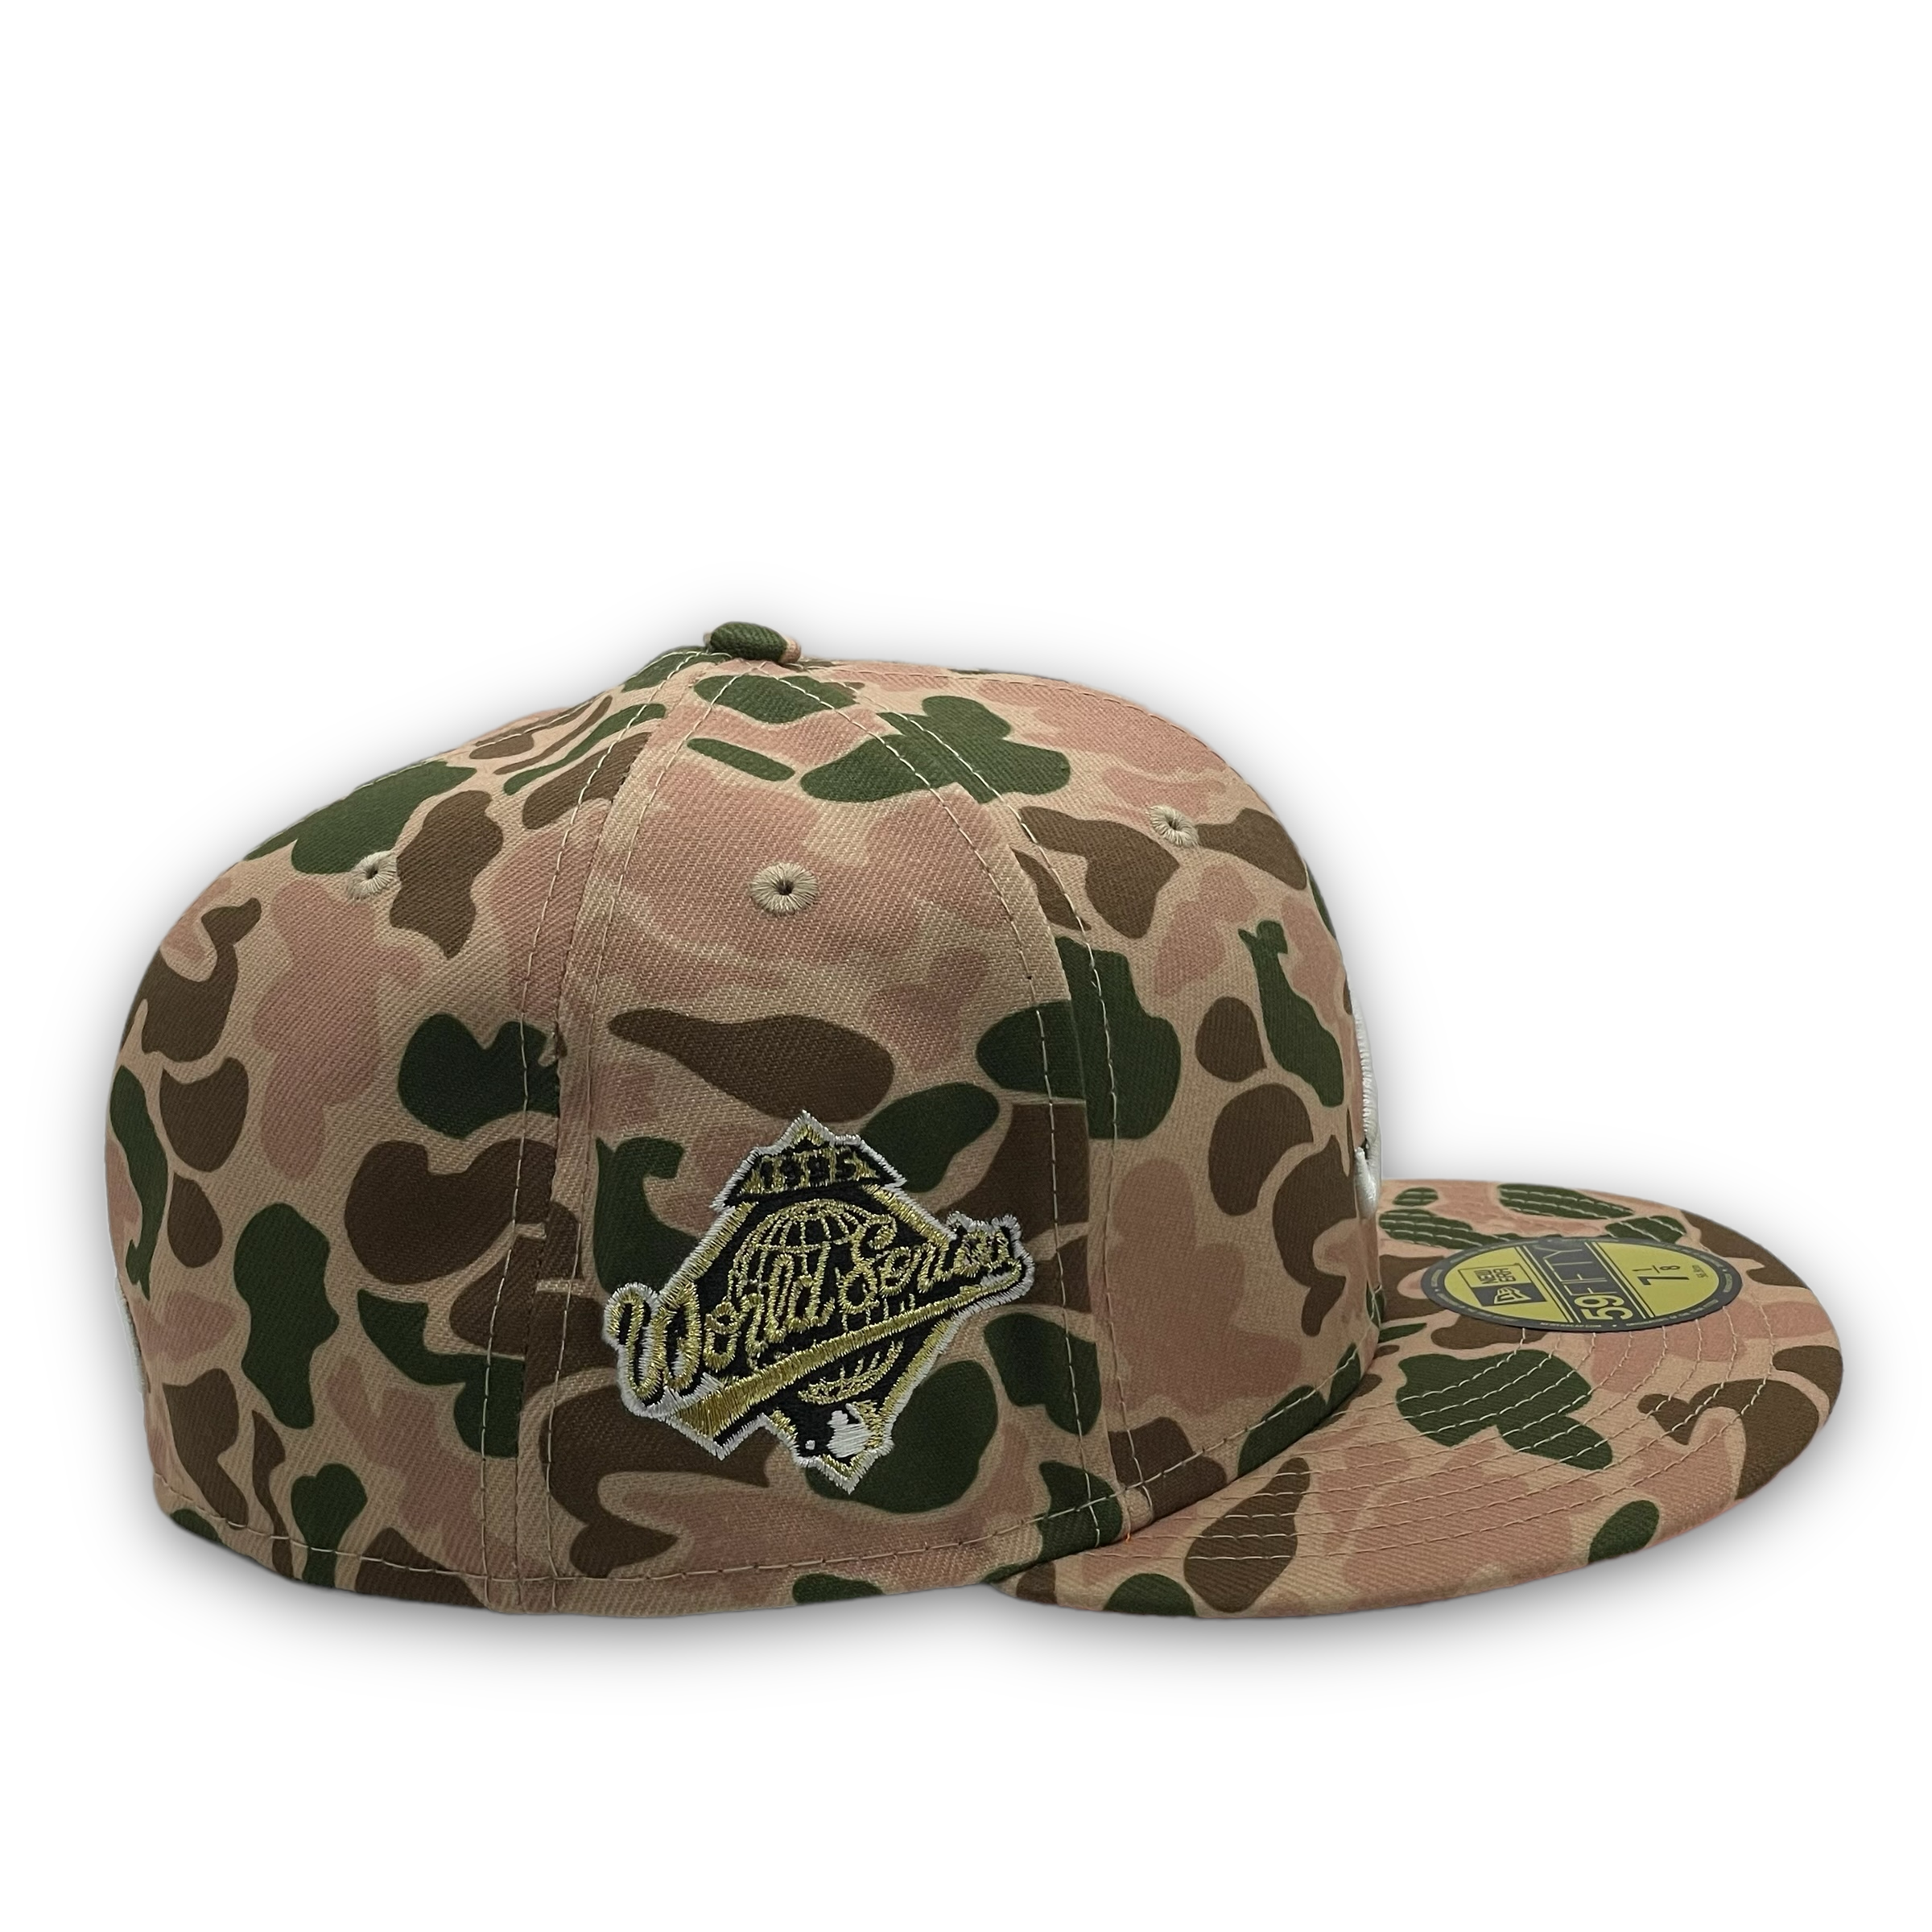 Atlanta Braves Camouflage Fitted Hat Size 7 - New Era 59Fifty Military Camo  Hat